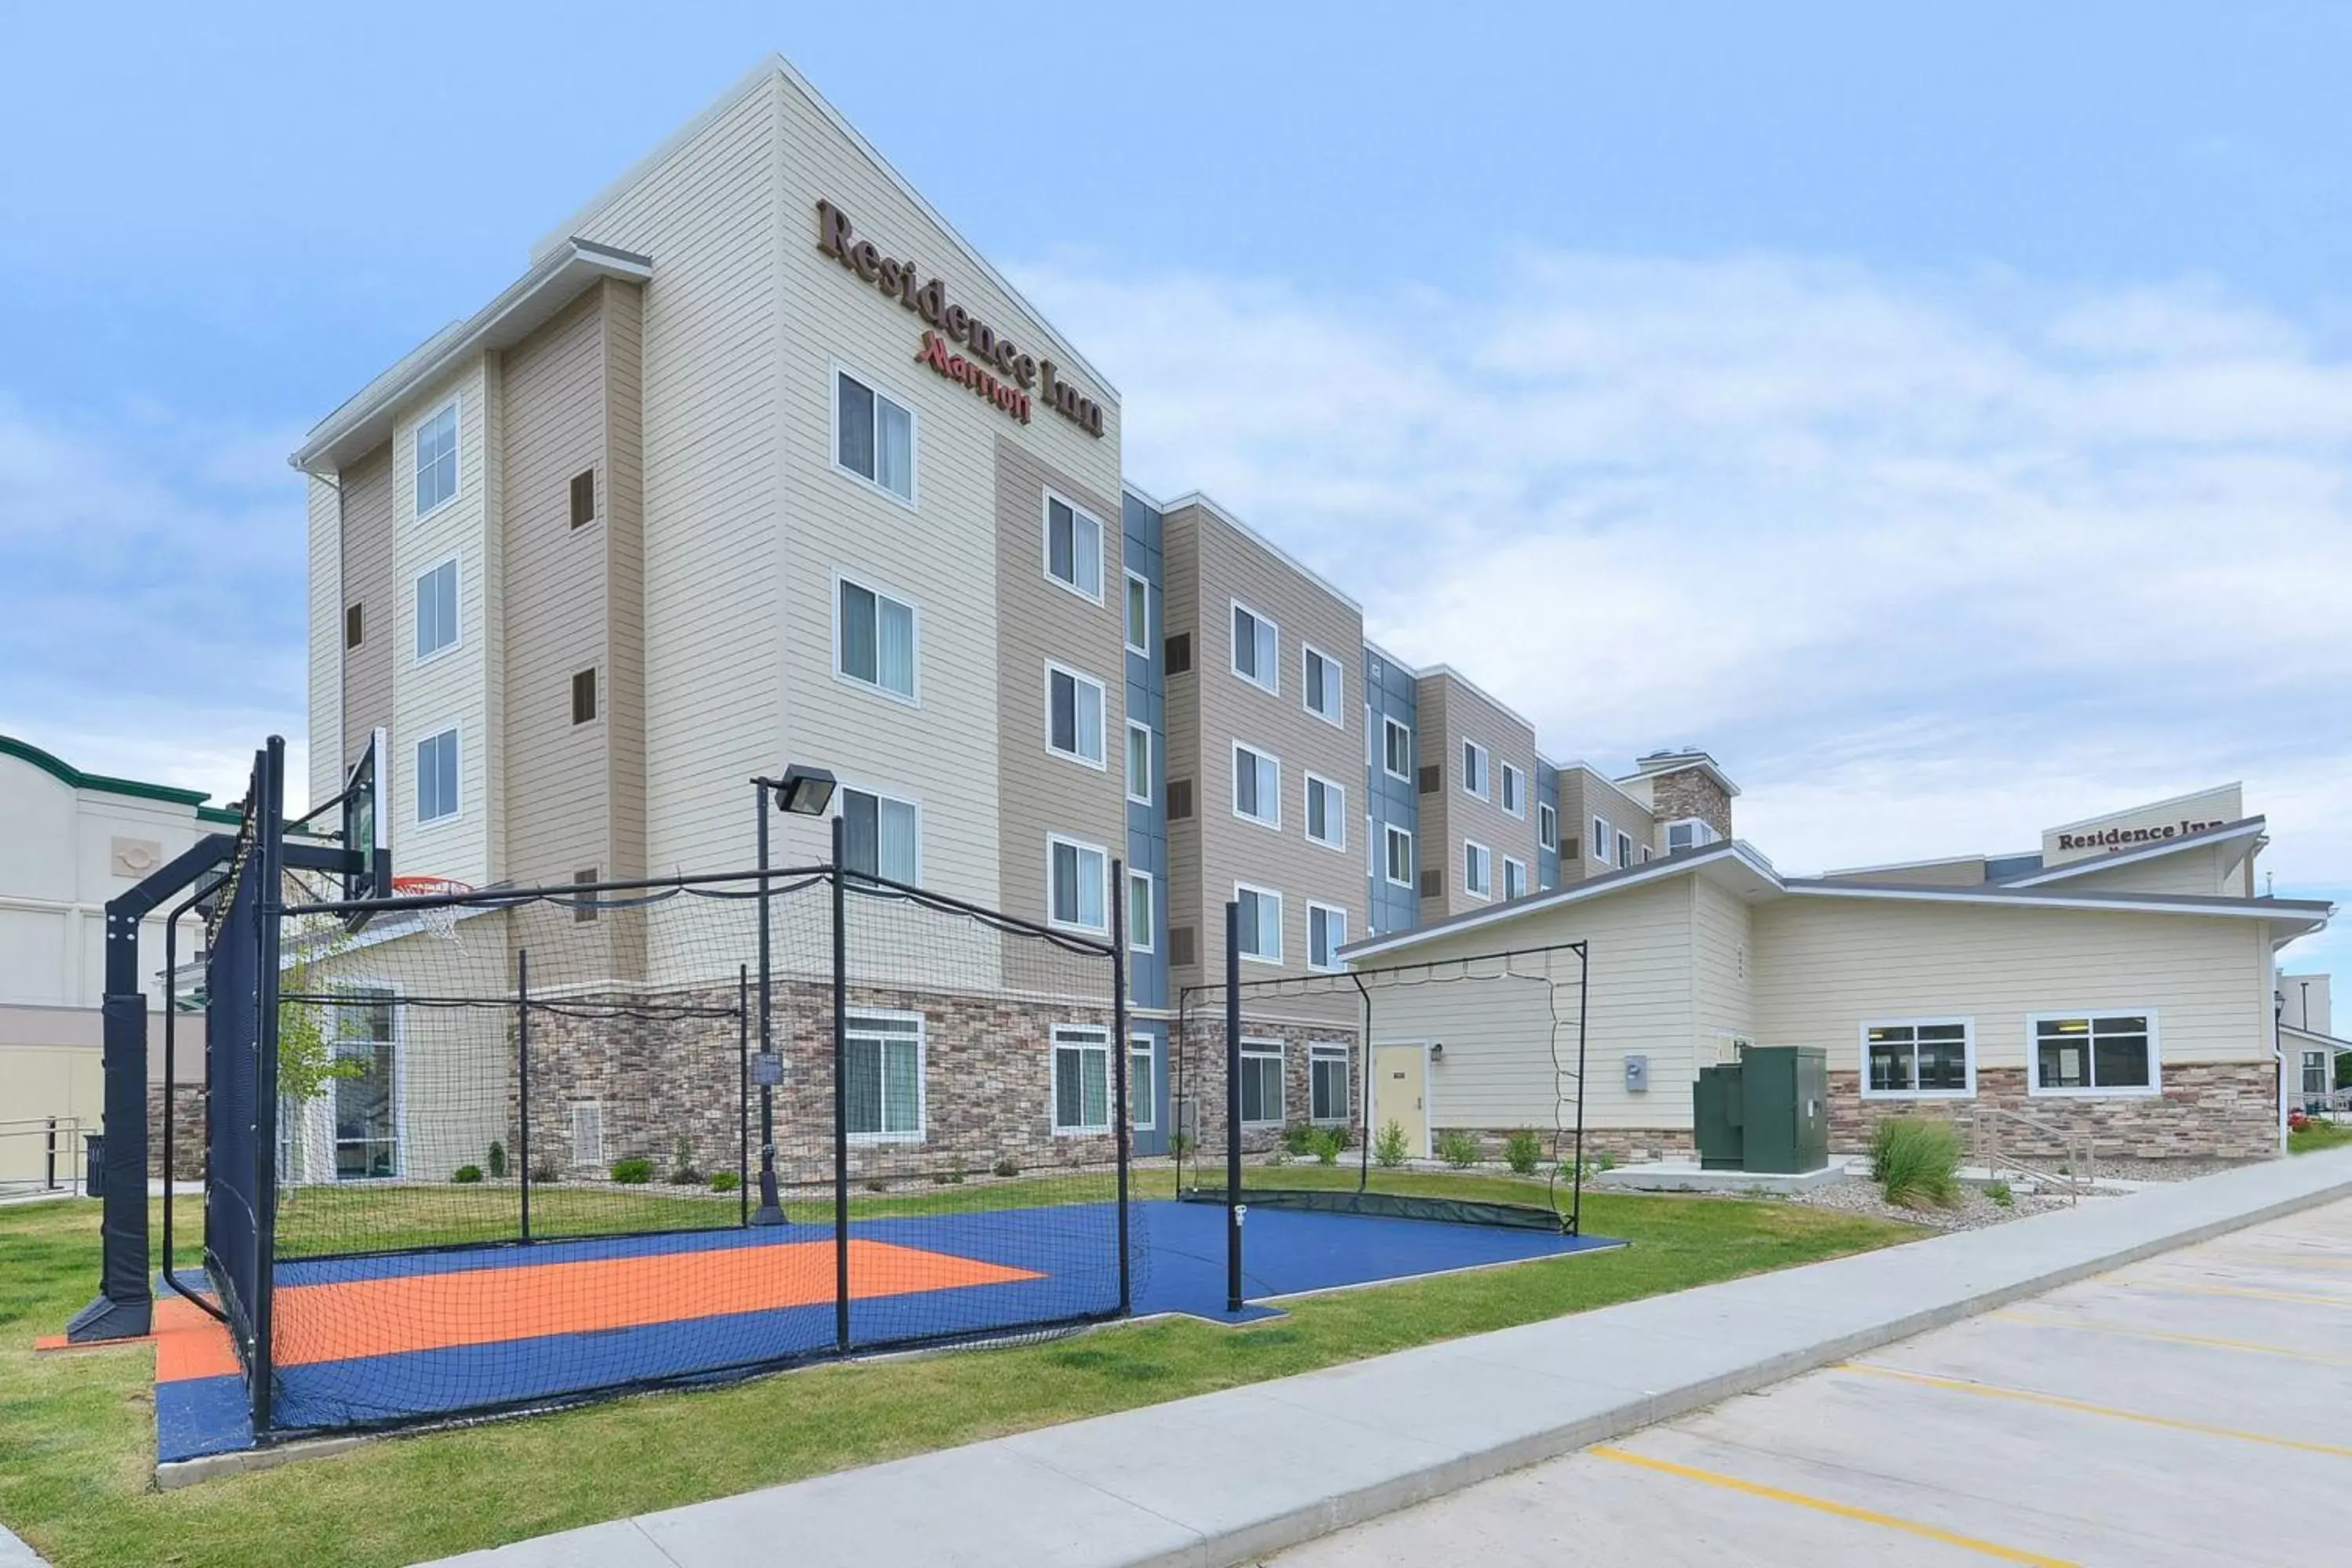 Area and facilities, Property Building in Residence Inn by Marriott Champaign